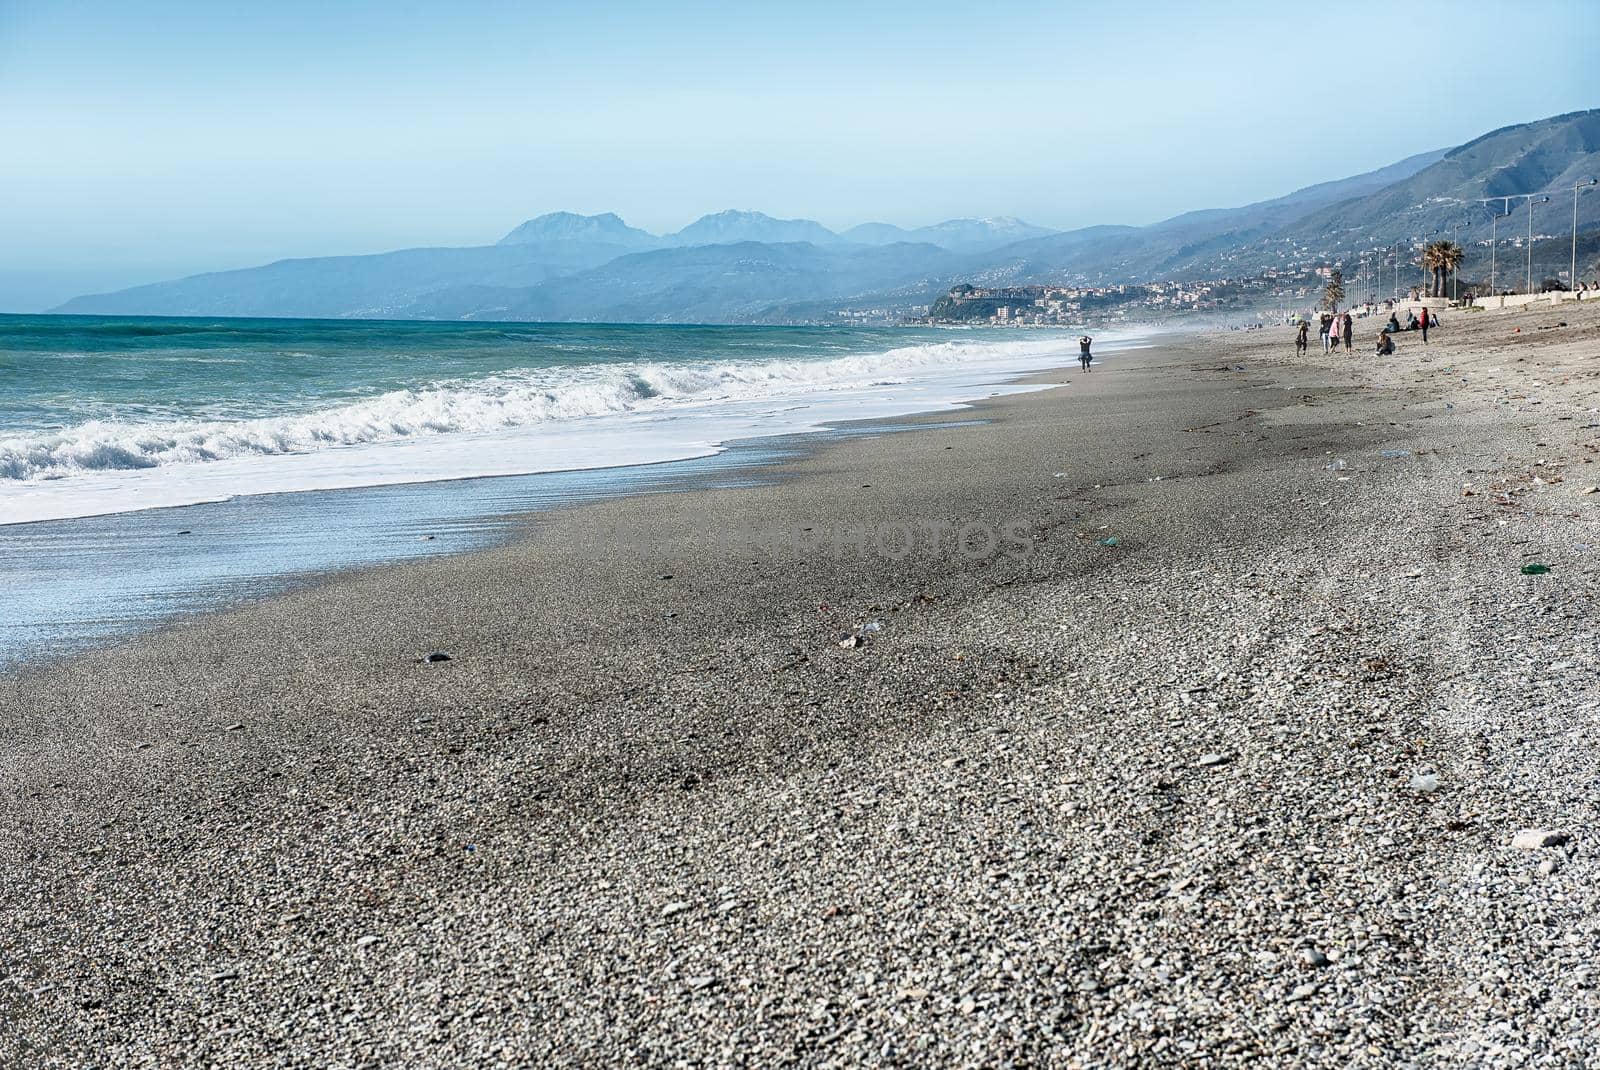 Landscape with a scenic sandy beach on the thyrrenian coastline in Calabria, Italy